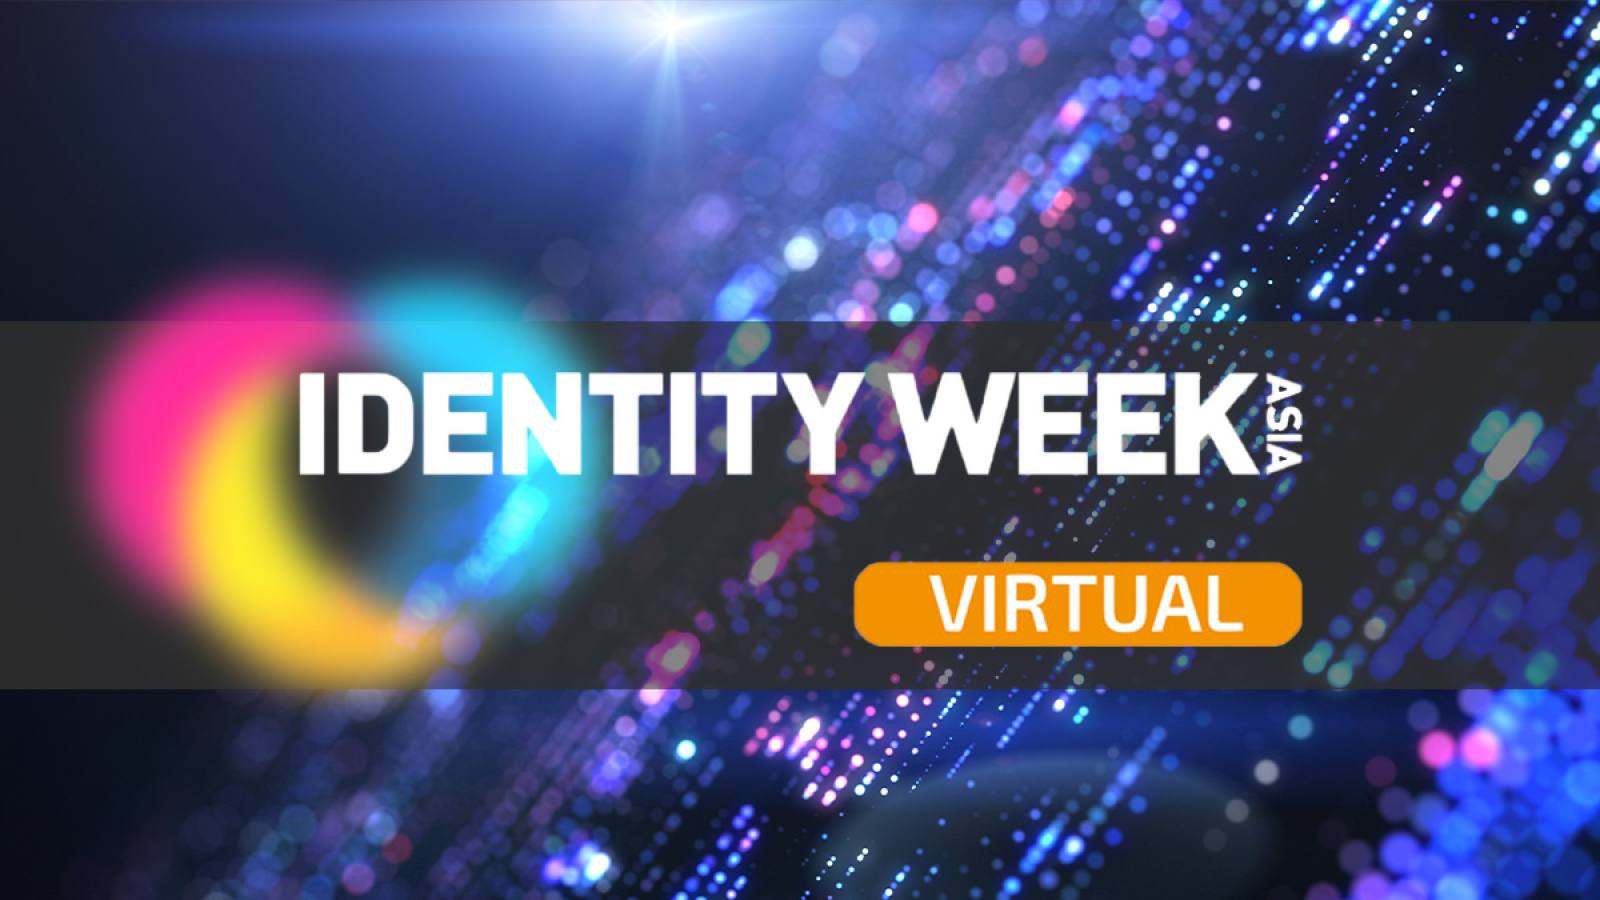 Identity Week Asia to bring entire identity industry together from 14 October 